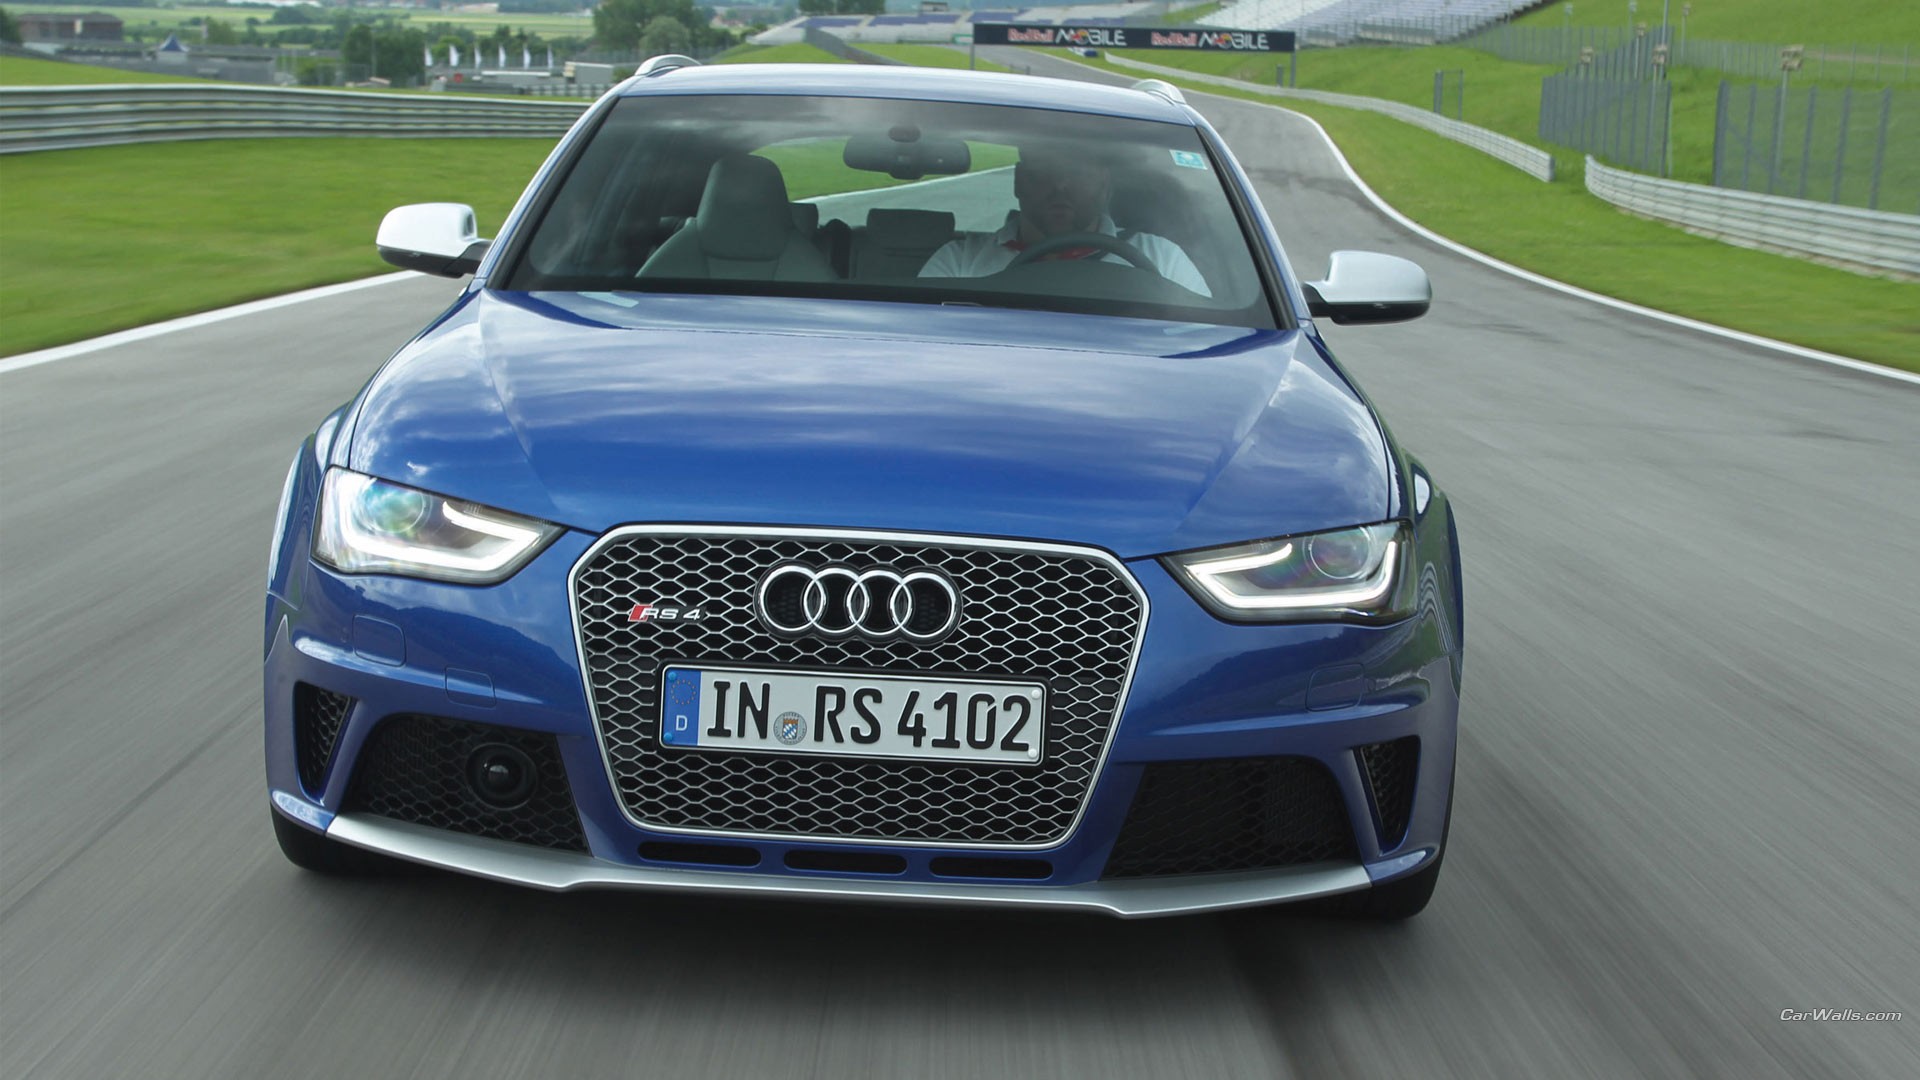 General 1920x1080 Audi RS4 blue cars Audi car vehicle station wagon German cars Volkswagen Group